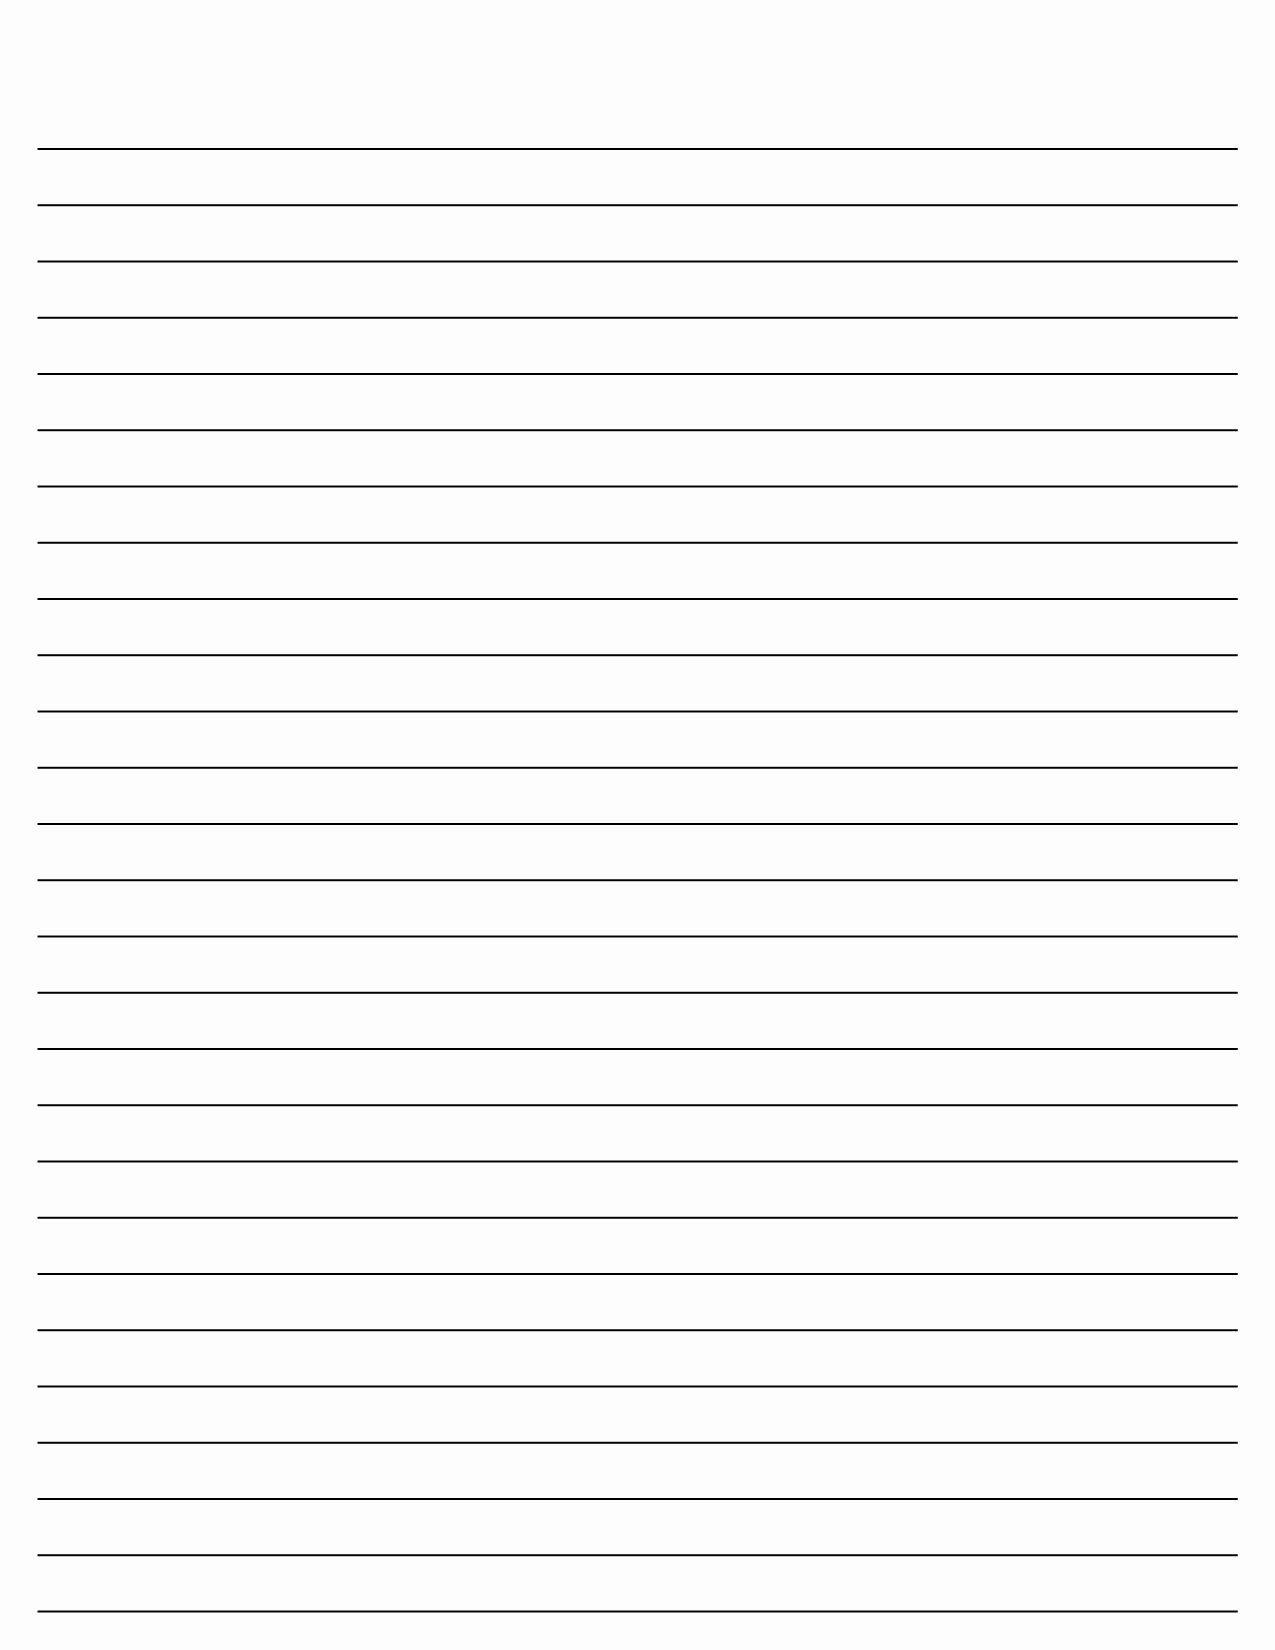 Free Printable Lined Paper Awesome Printable Lined Paper Search Results Landscaping